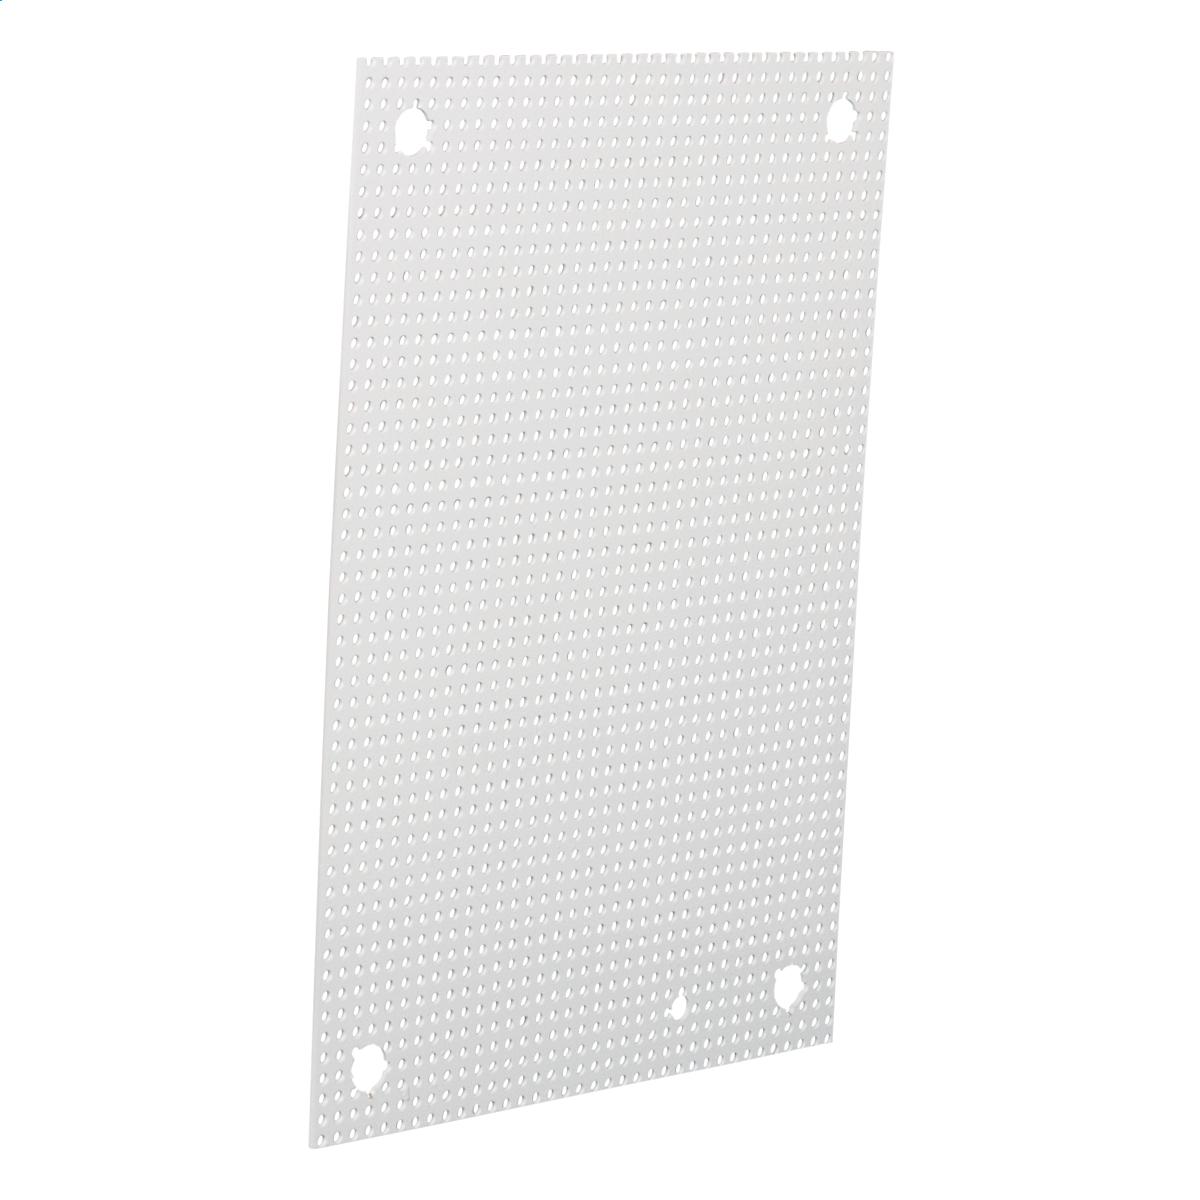 Hubbell NP1212CPP Perforated Panel (Ultimate) 10.2X10.2 Carbon Steel - White  ; Fabricated from carbon steel ; Painted with white polyester powder ; Perforated panels accept self-tapping screws which eliminates the need to measure, mark, and drill when mounting components 